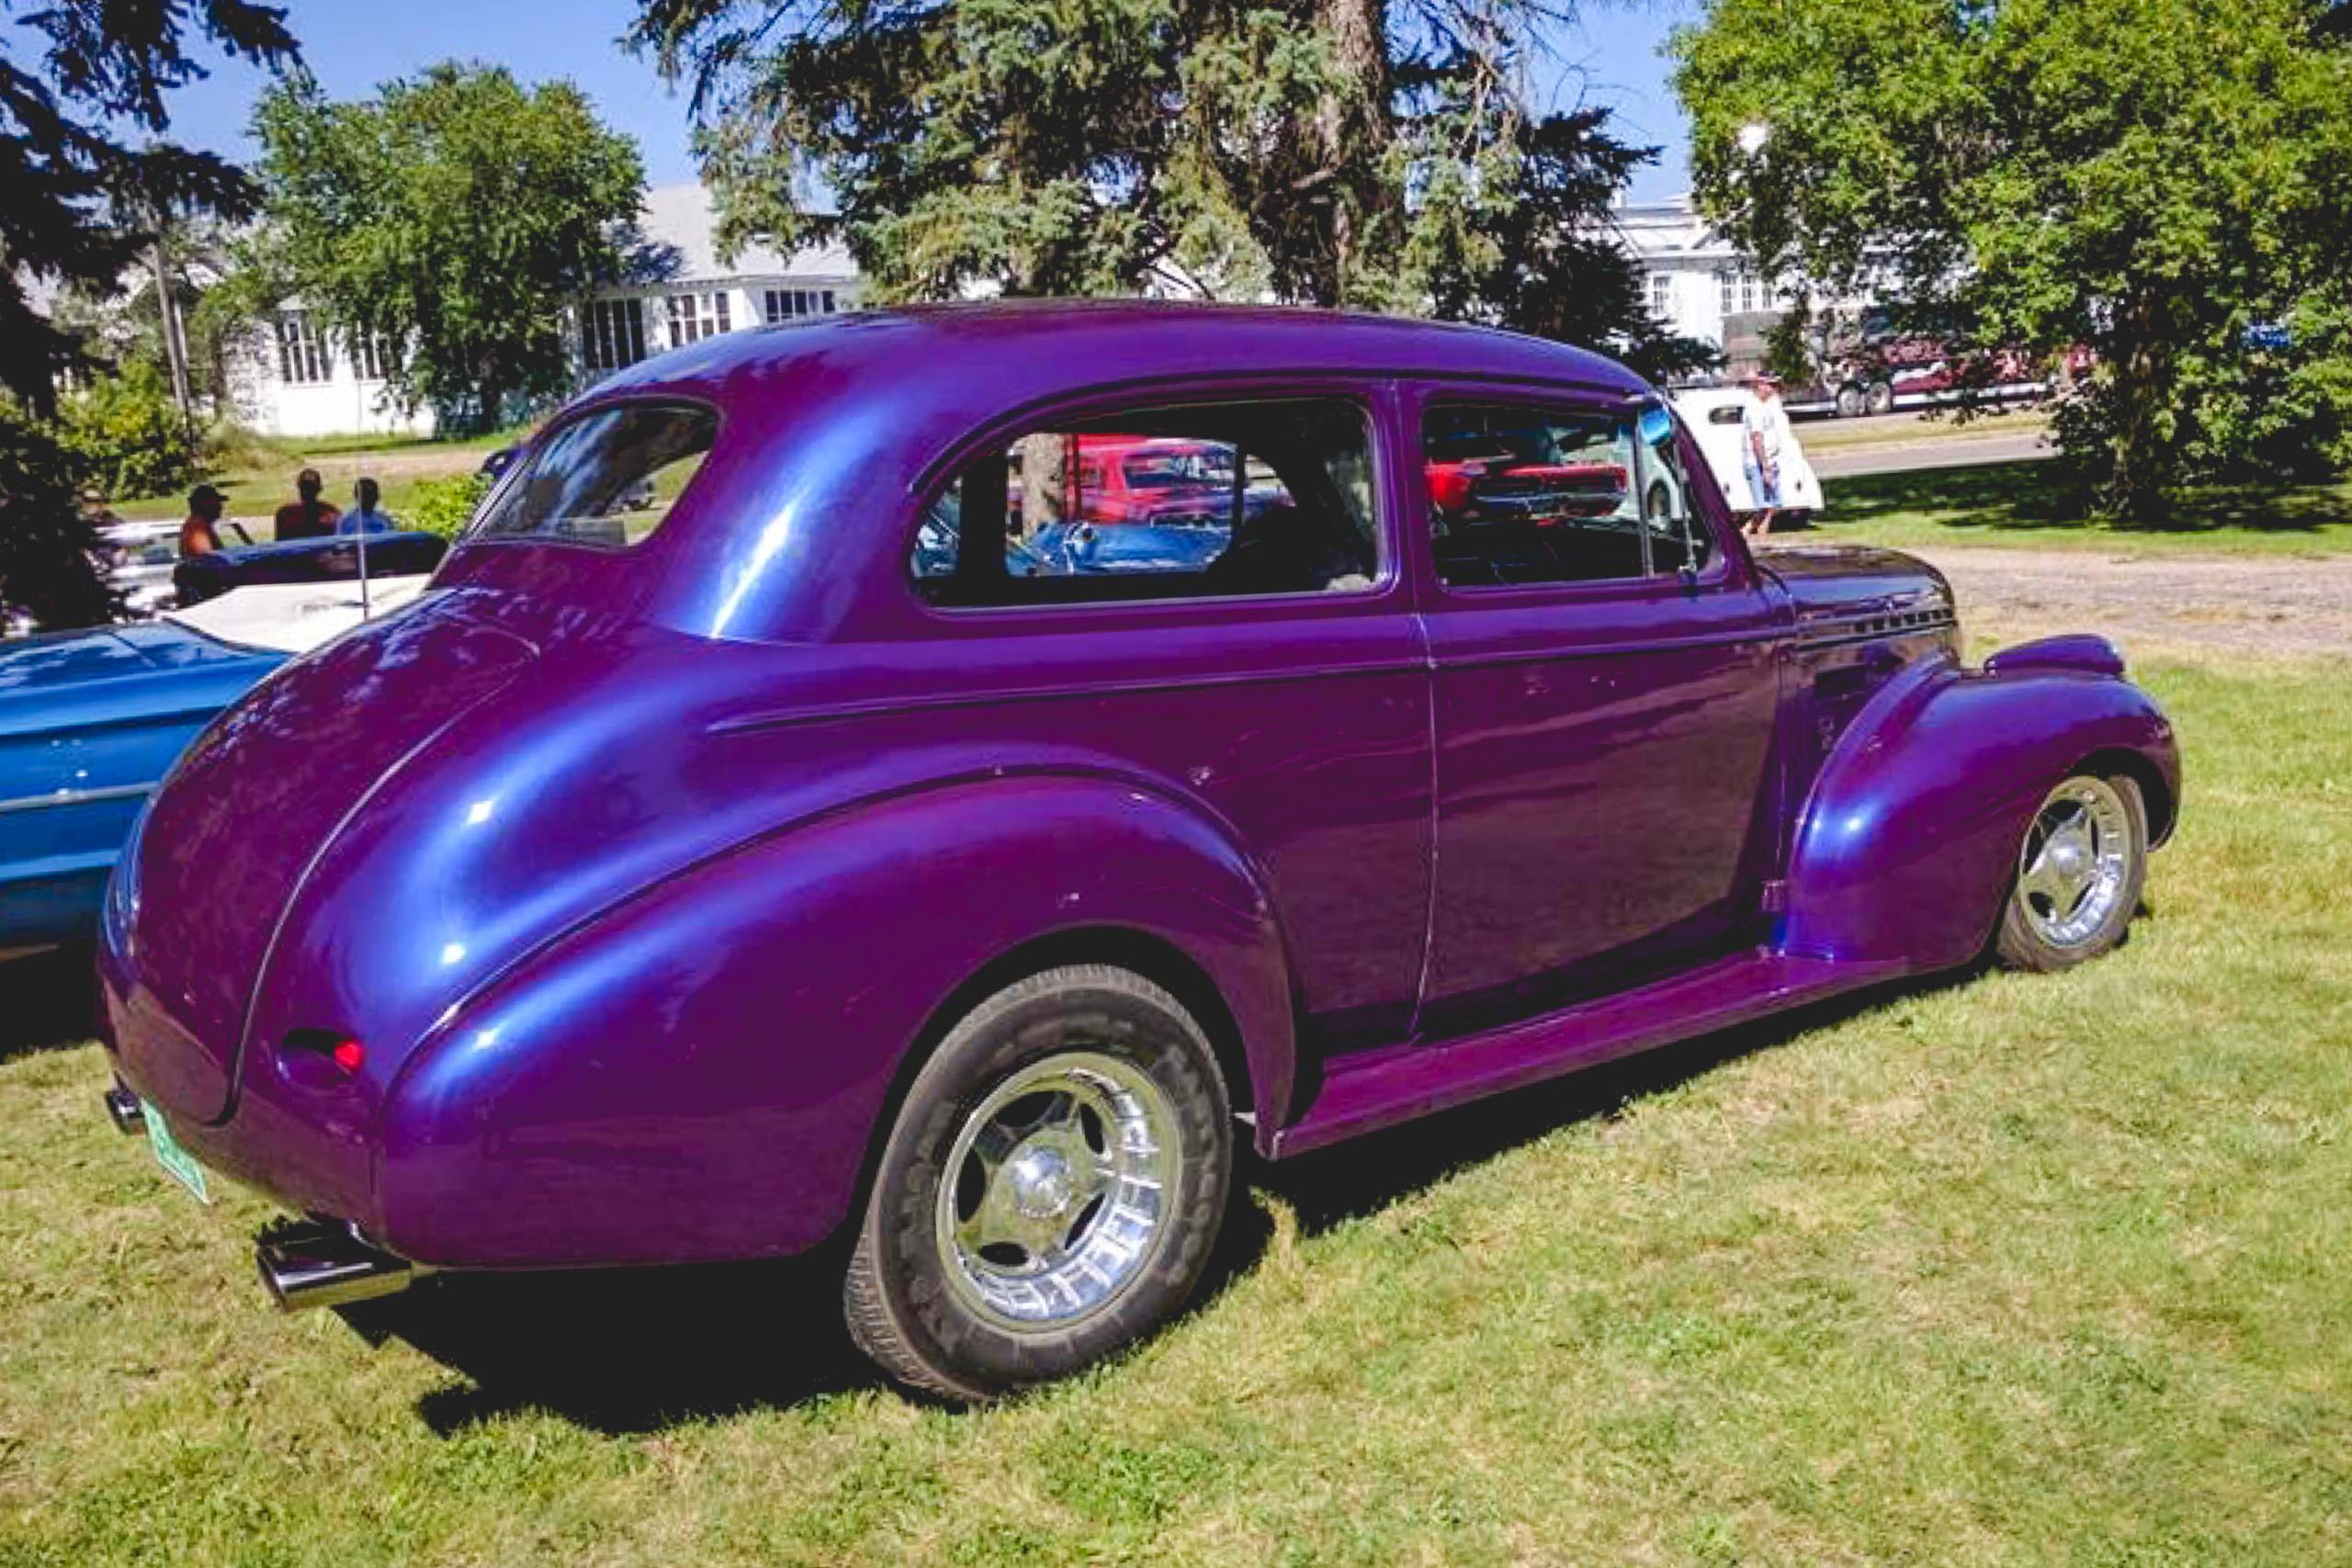 antique car financing for purple vehicle